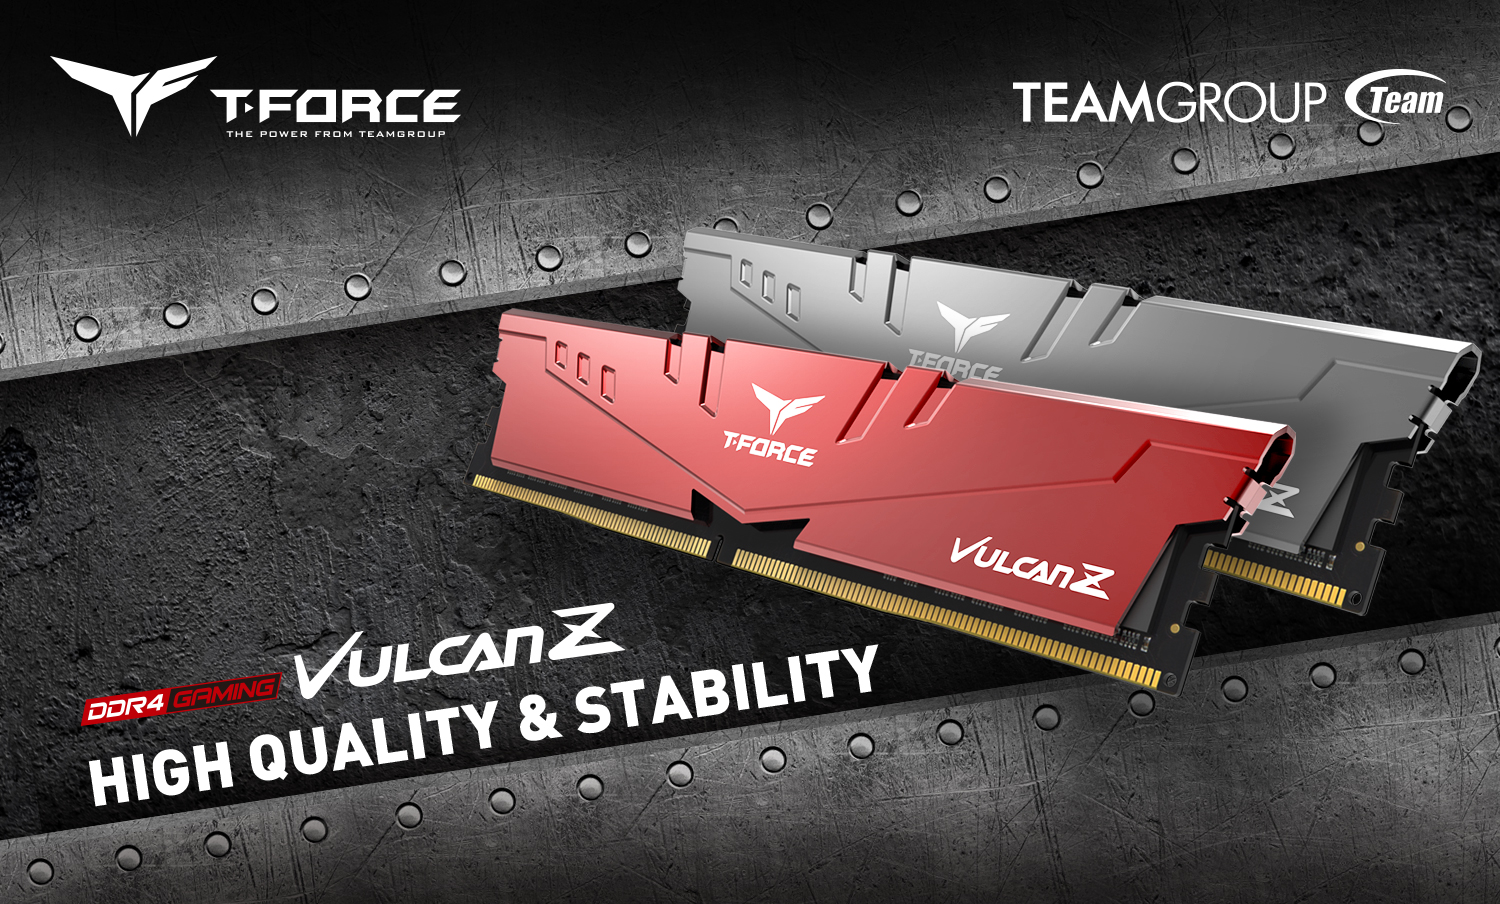 T-FORCE and TEAMGROUP logos above the red and gray memory sticks angled up, looking to the left next to text that reads DDR4 GAMING VULCAN Z - HIGH-QUALITY & STABILITY. The background is a sheet metal background